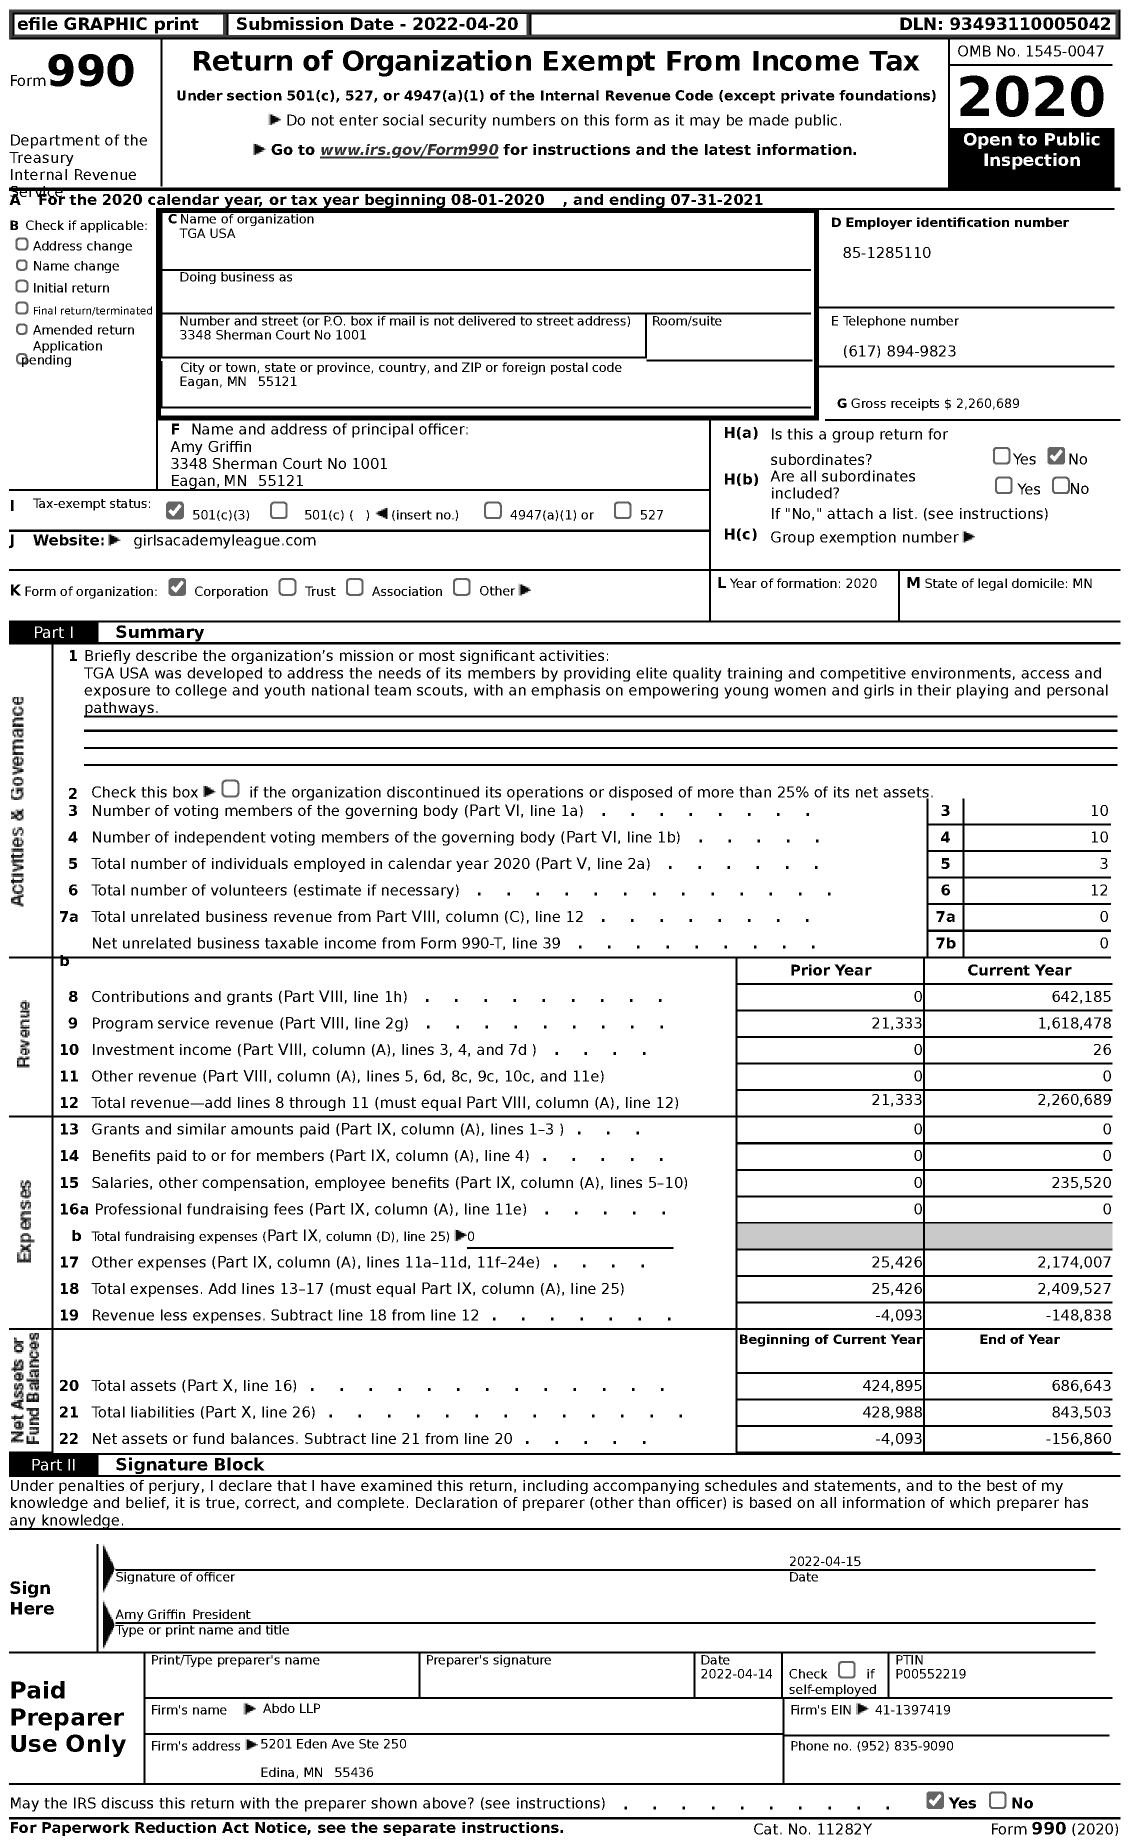 Image of first page of 2020 Form 990 for Tga USA